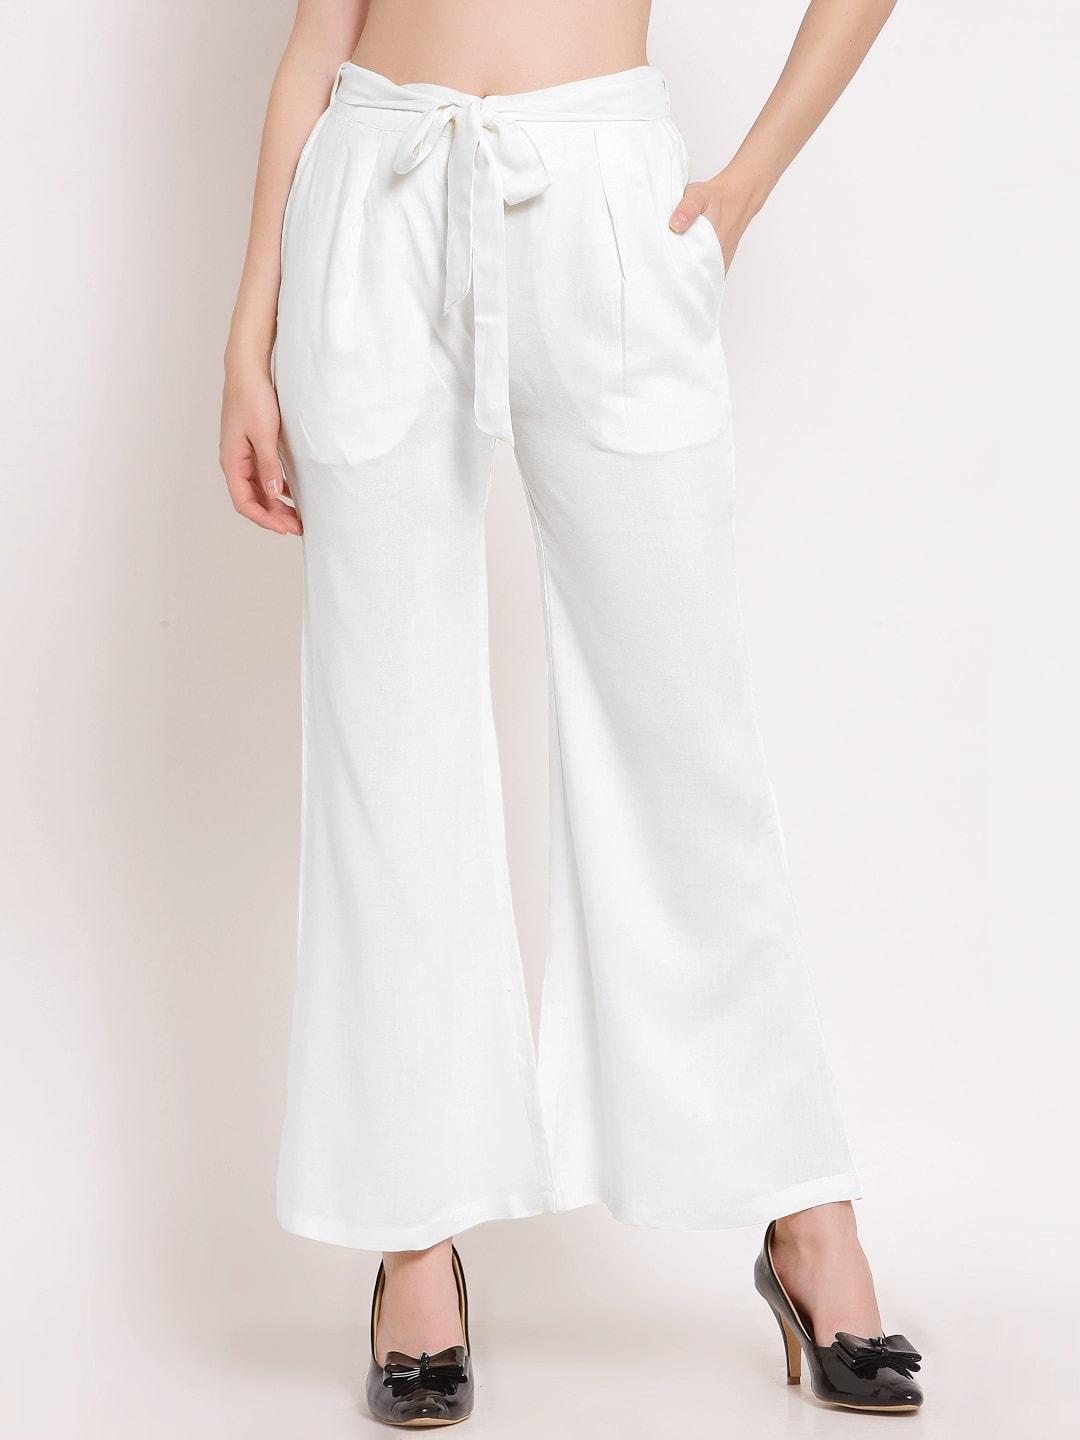 patrorna-women-smart-tapered-fit-mid-rise-parallel-trousers